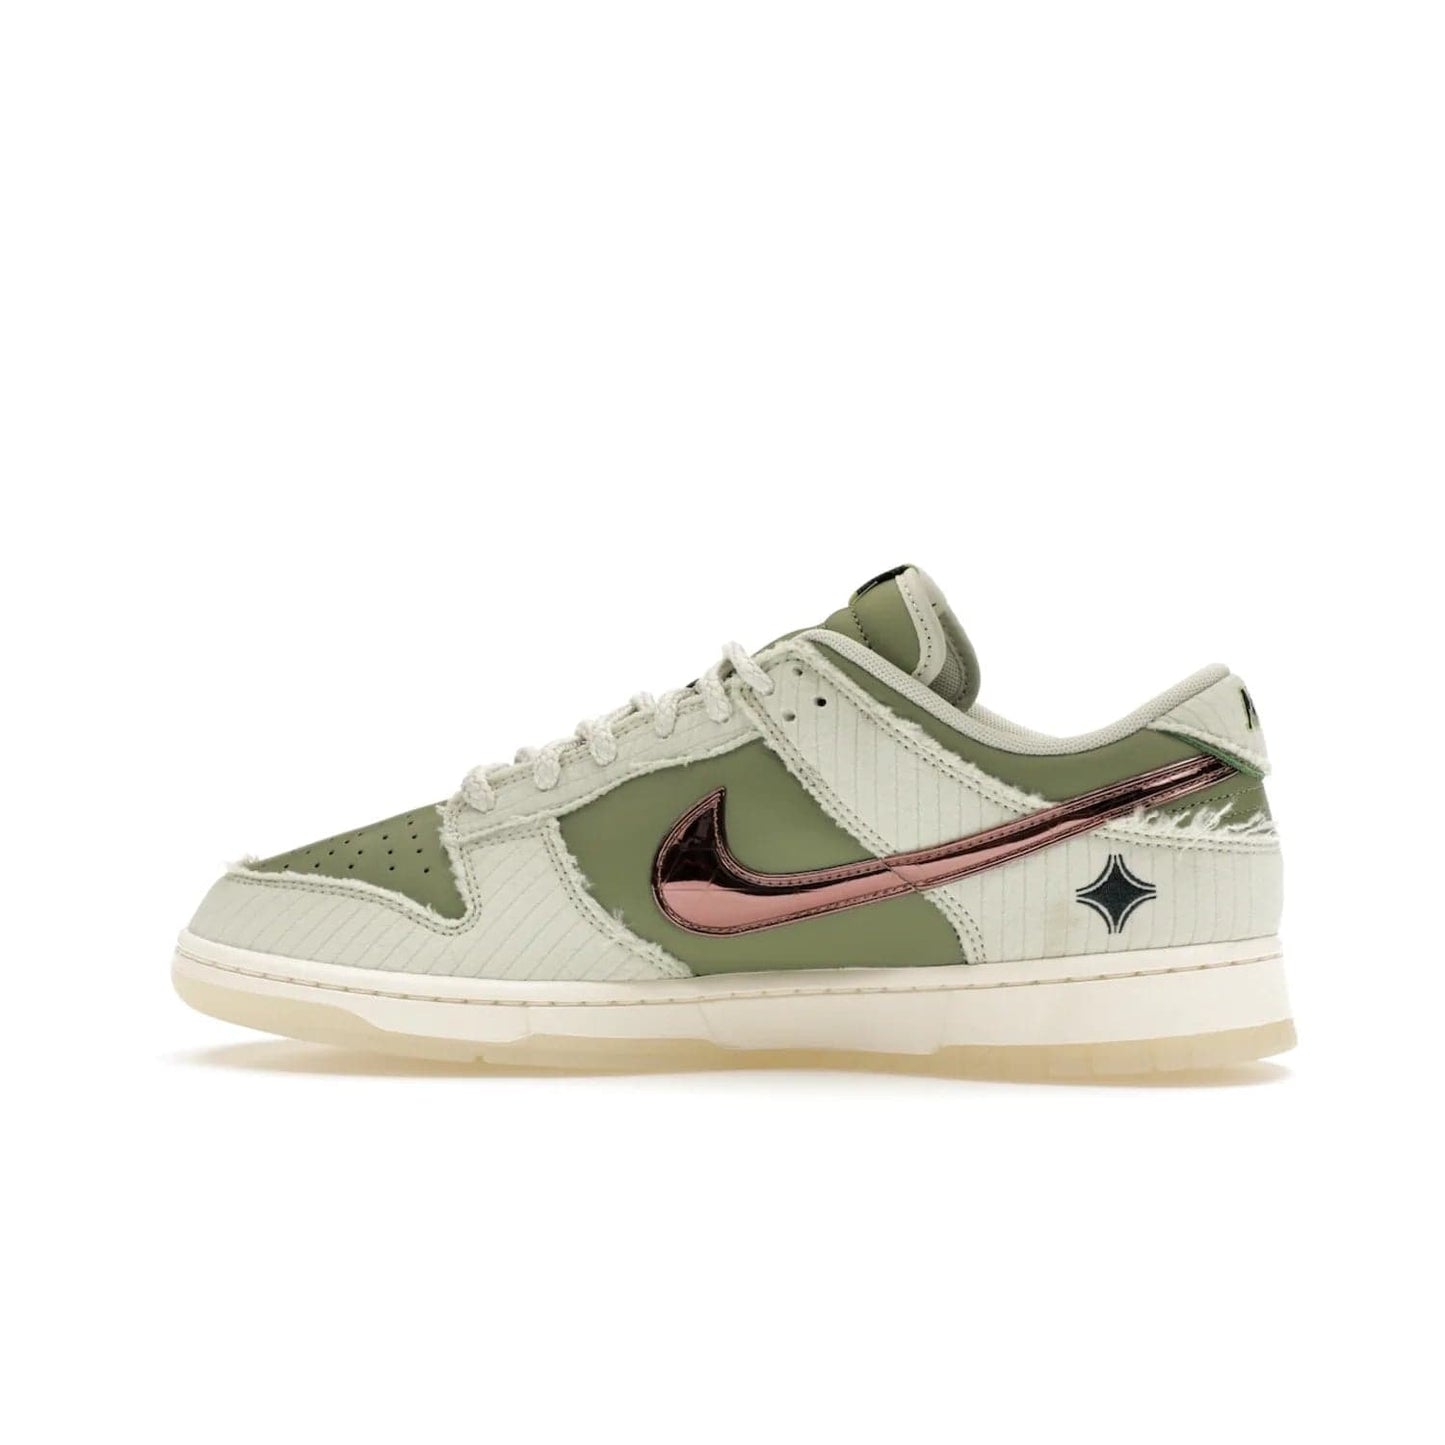 Nike Dunk Low Retro PRM Kyler Murray Be 1 of One - Image 20 - Only at www.BallersClubKickz.com - Introducing the Nike Dunk Low Retro PRM Kyler Murray "Be 1 of One"! A Sea Glass upper with Sail and Oil Green accents, finished with Rose Gold accents. Drop date: November 10th.